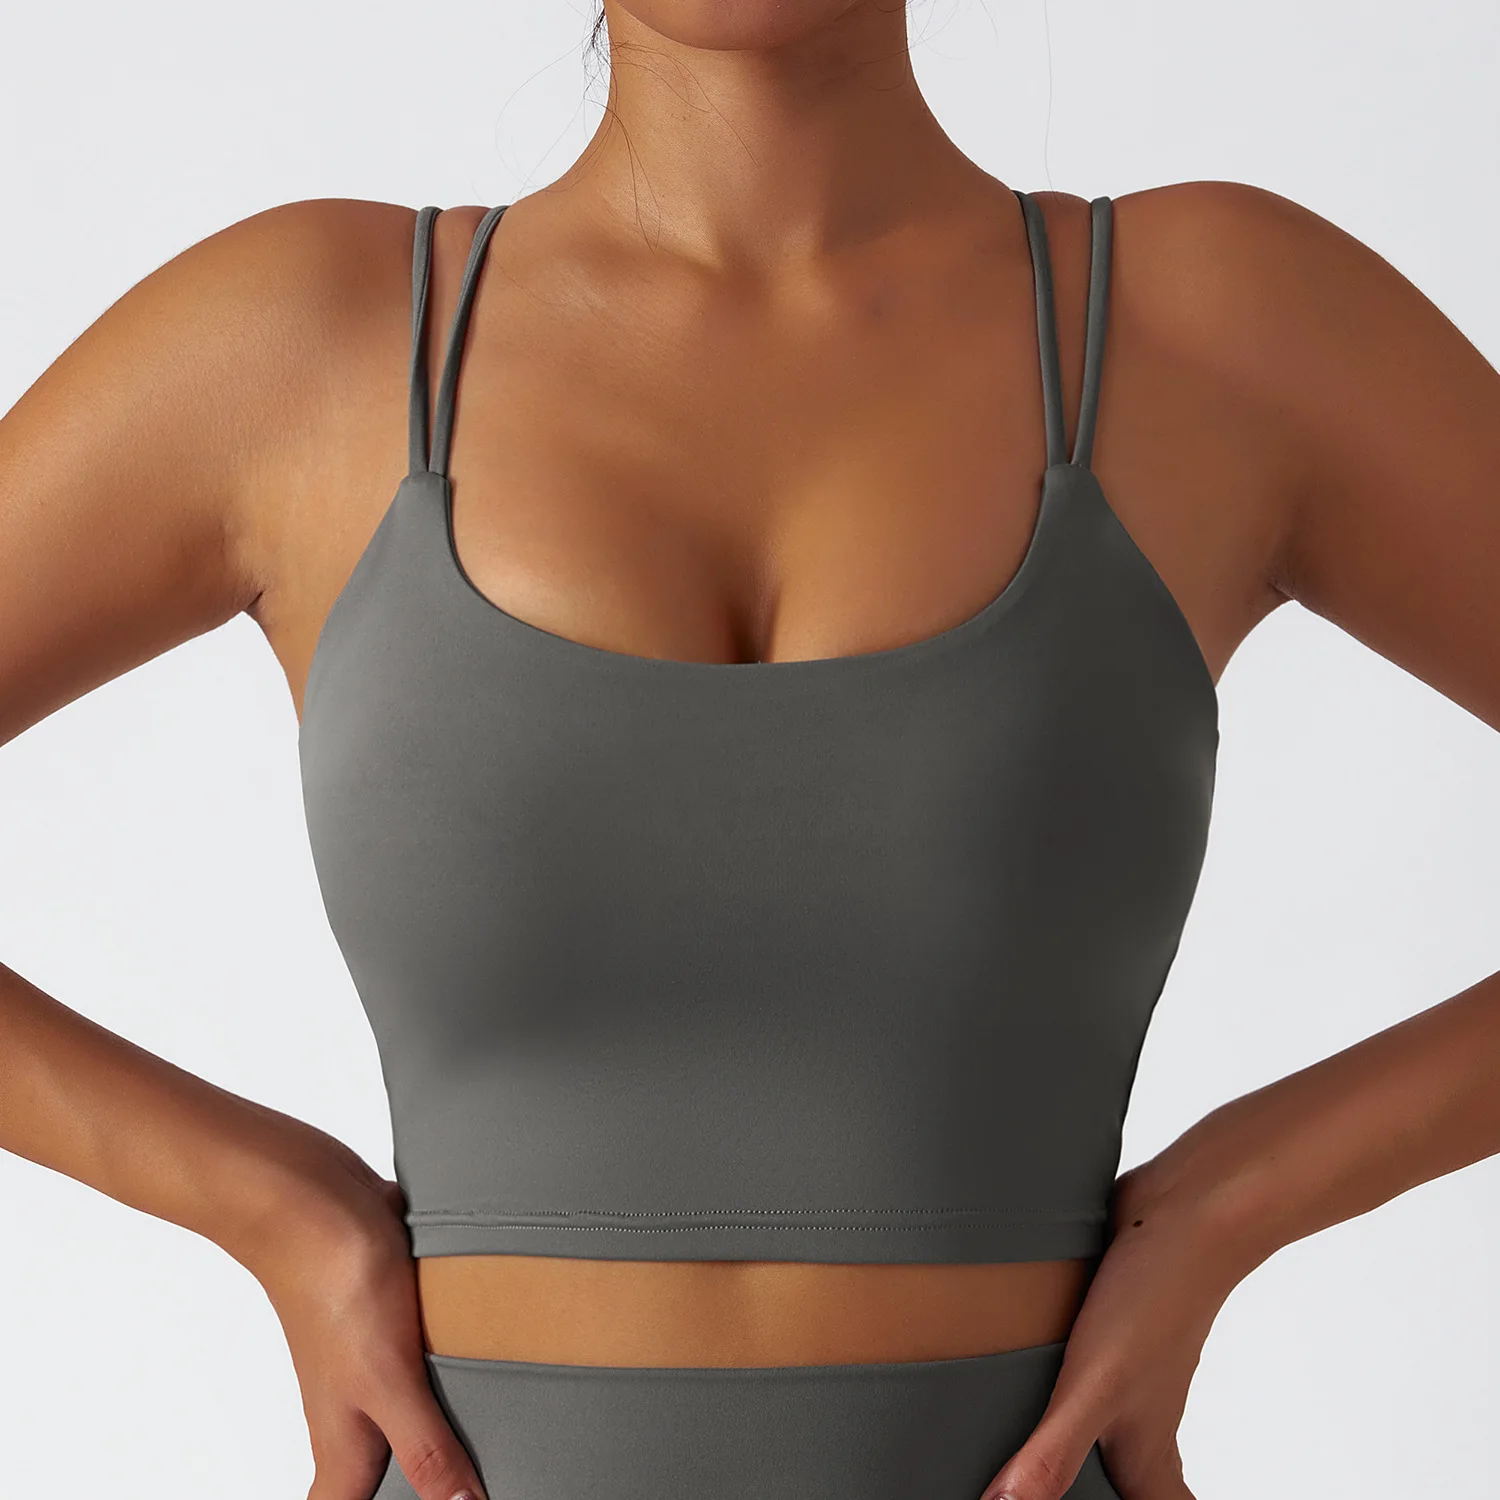 YIYI Tops Sale Two Straps High Impact Workout Tops Push Up Shockproof Gym Tops High Elastic Eco Friendly Recycled Yoga Bra